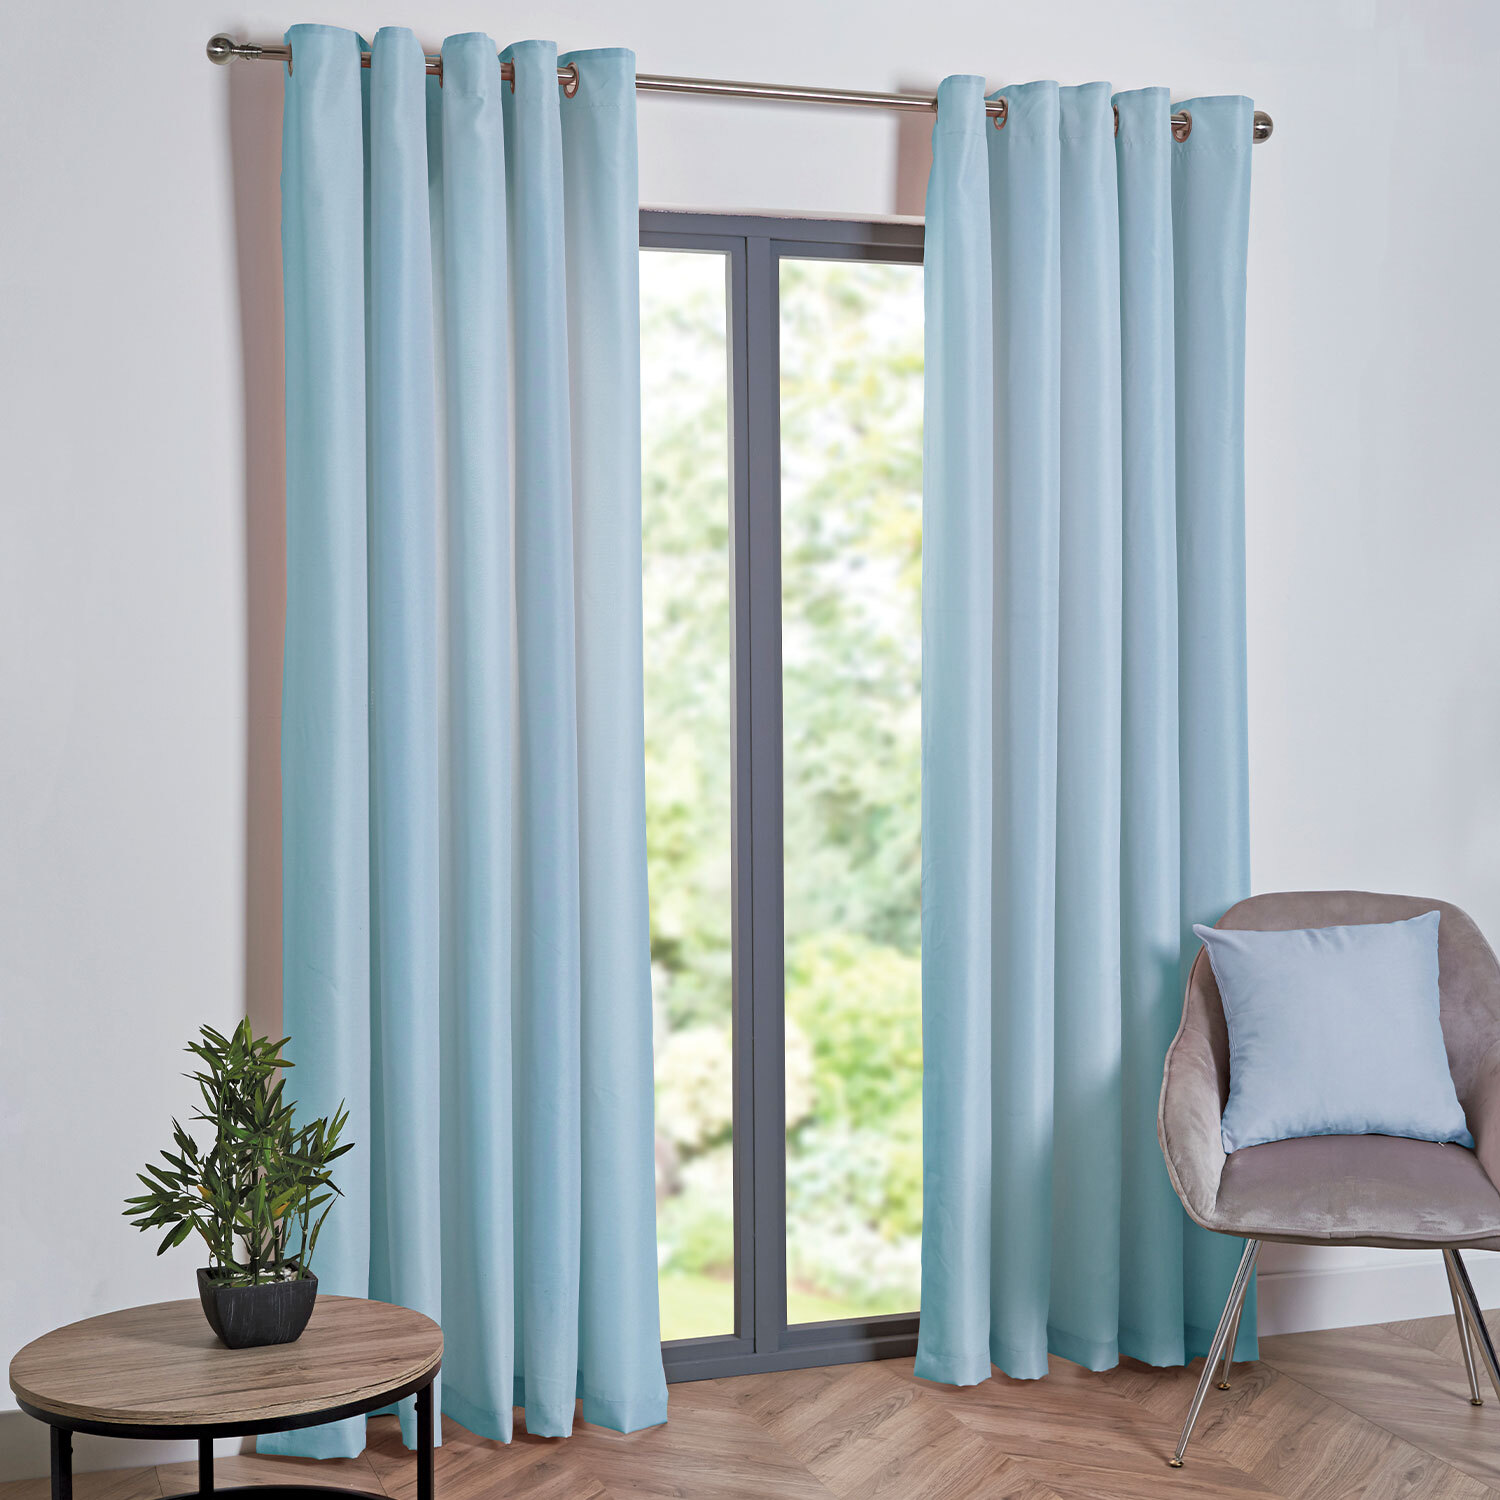 My Home Taylor Duck Egg Eyelet Curtains 168 x 137cm Image 2